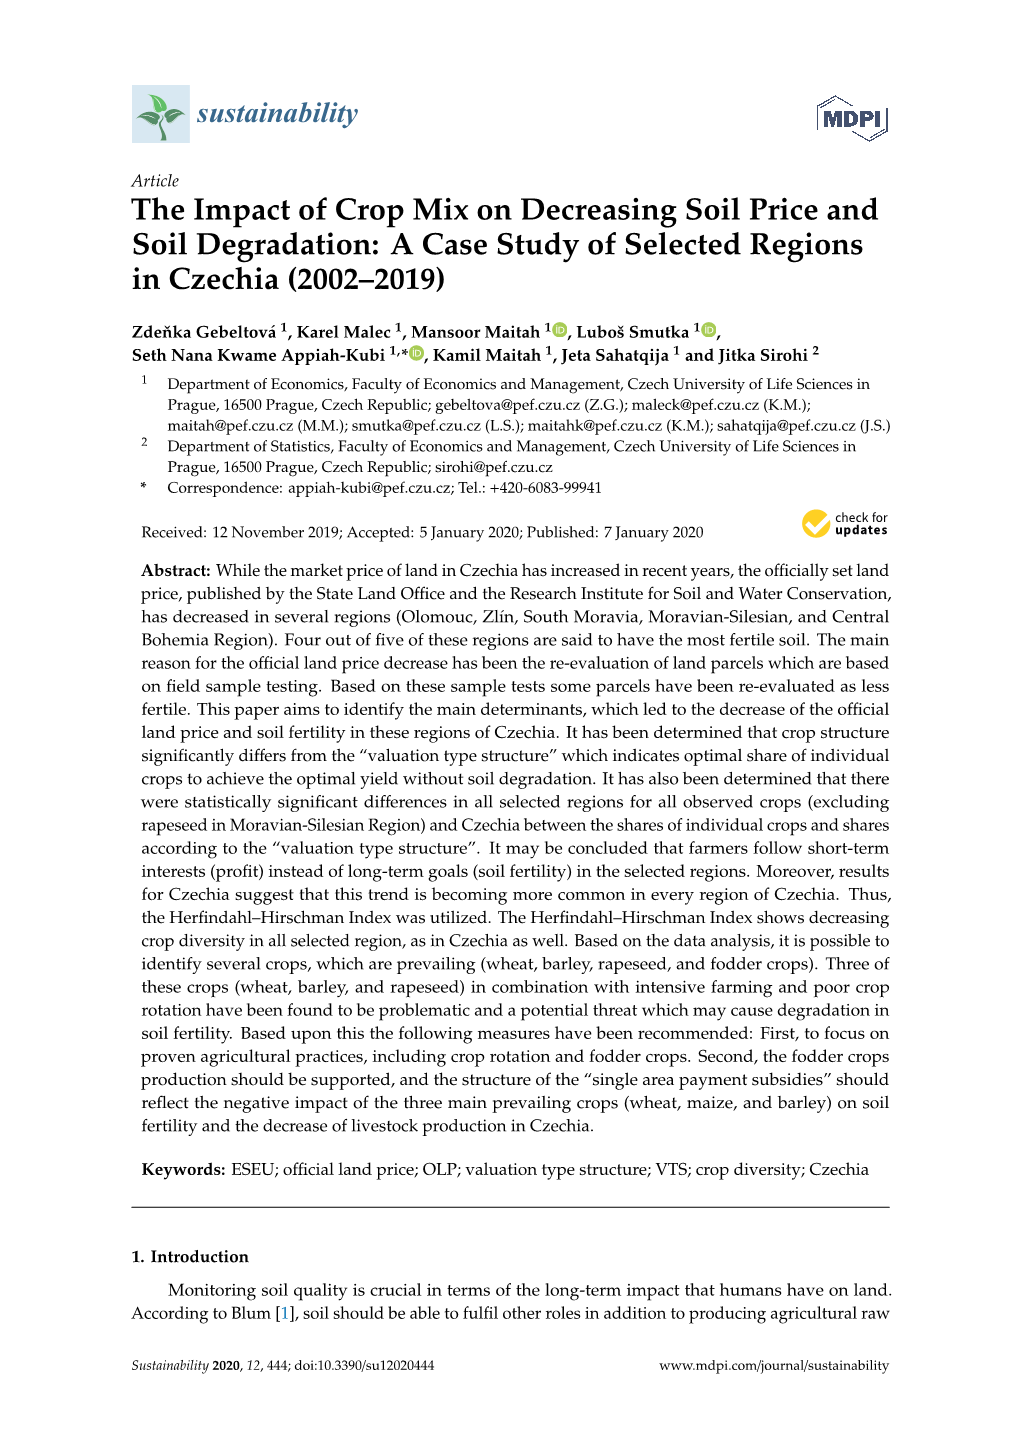 The Impact of Crop Mix on Decreasing Soil Price and Soil Degradation: a Case Study of Selected Regions in Czechia (2002–2019)